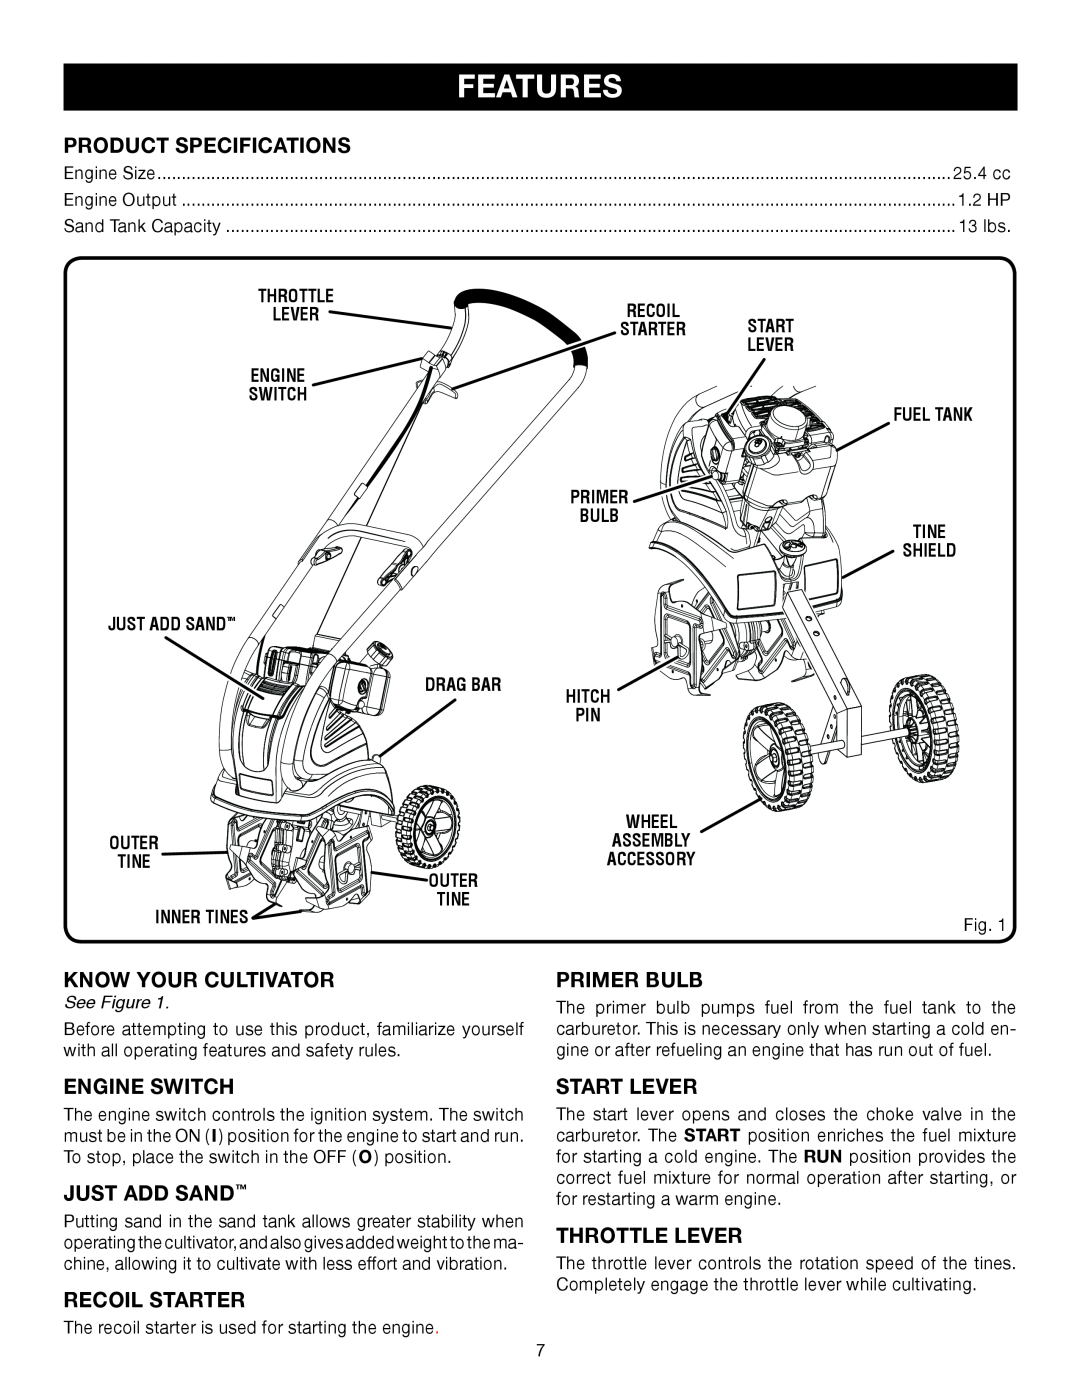 Ryobi Outdoor RY60511A Features, Product Specifications, Know Your Cultivator, Primer Bulb, Engine Switch, Just Add Sand 